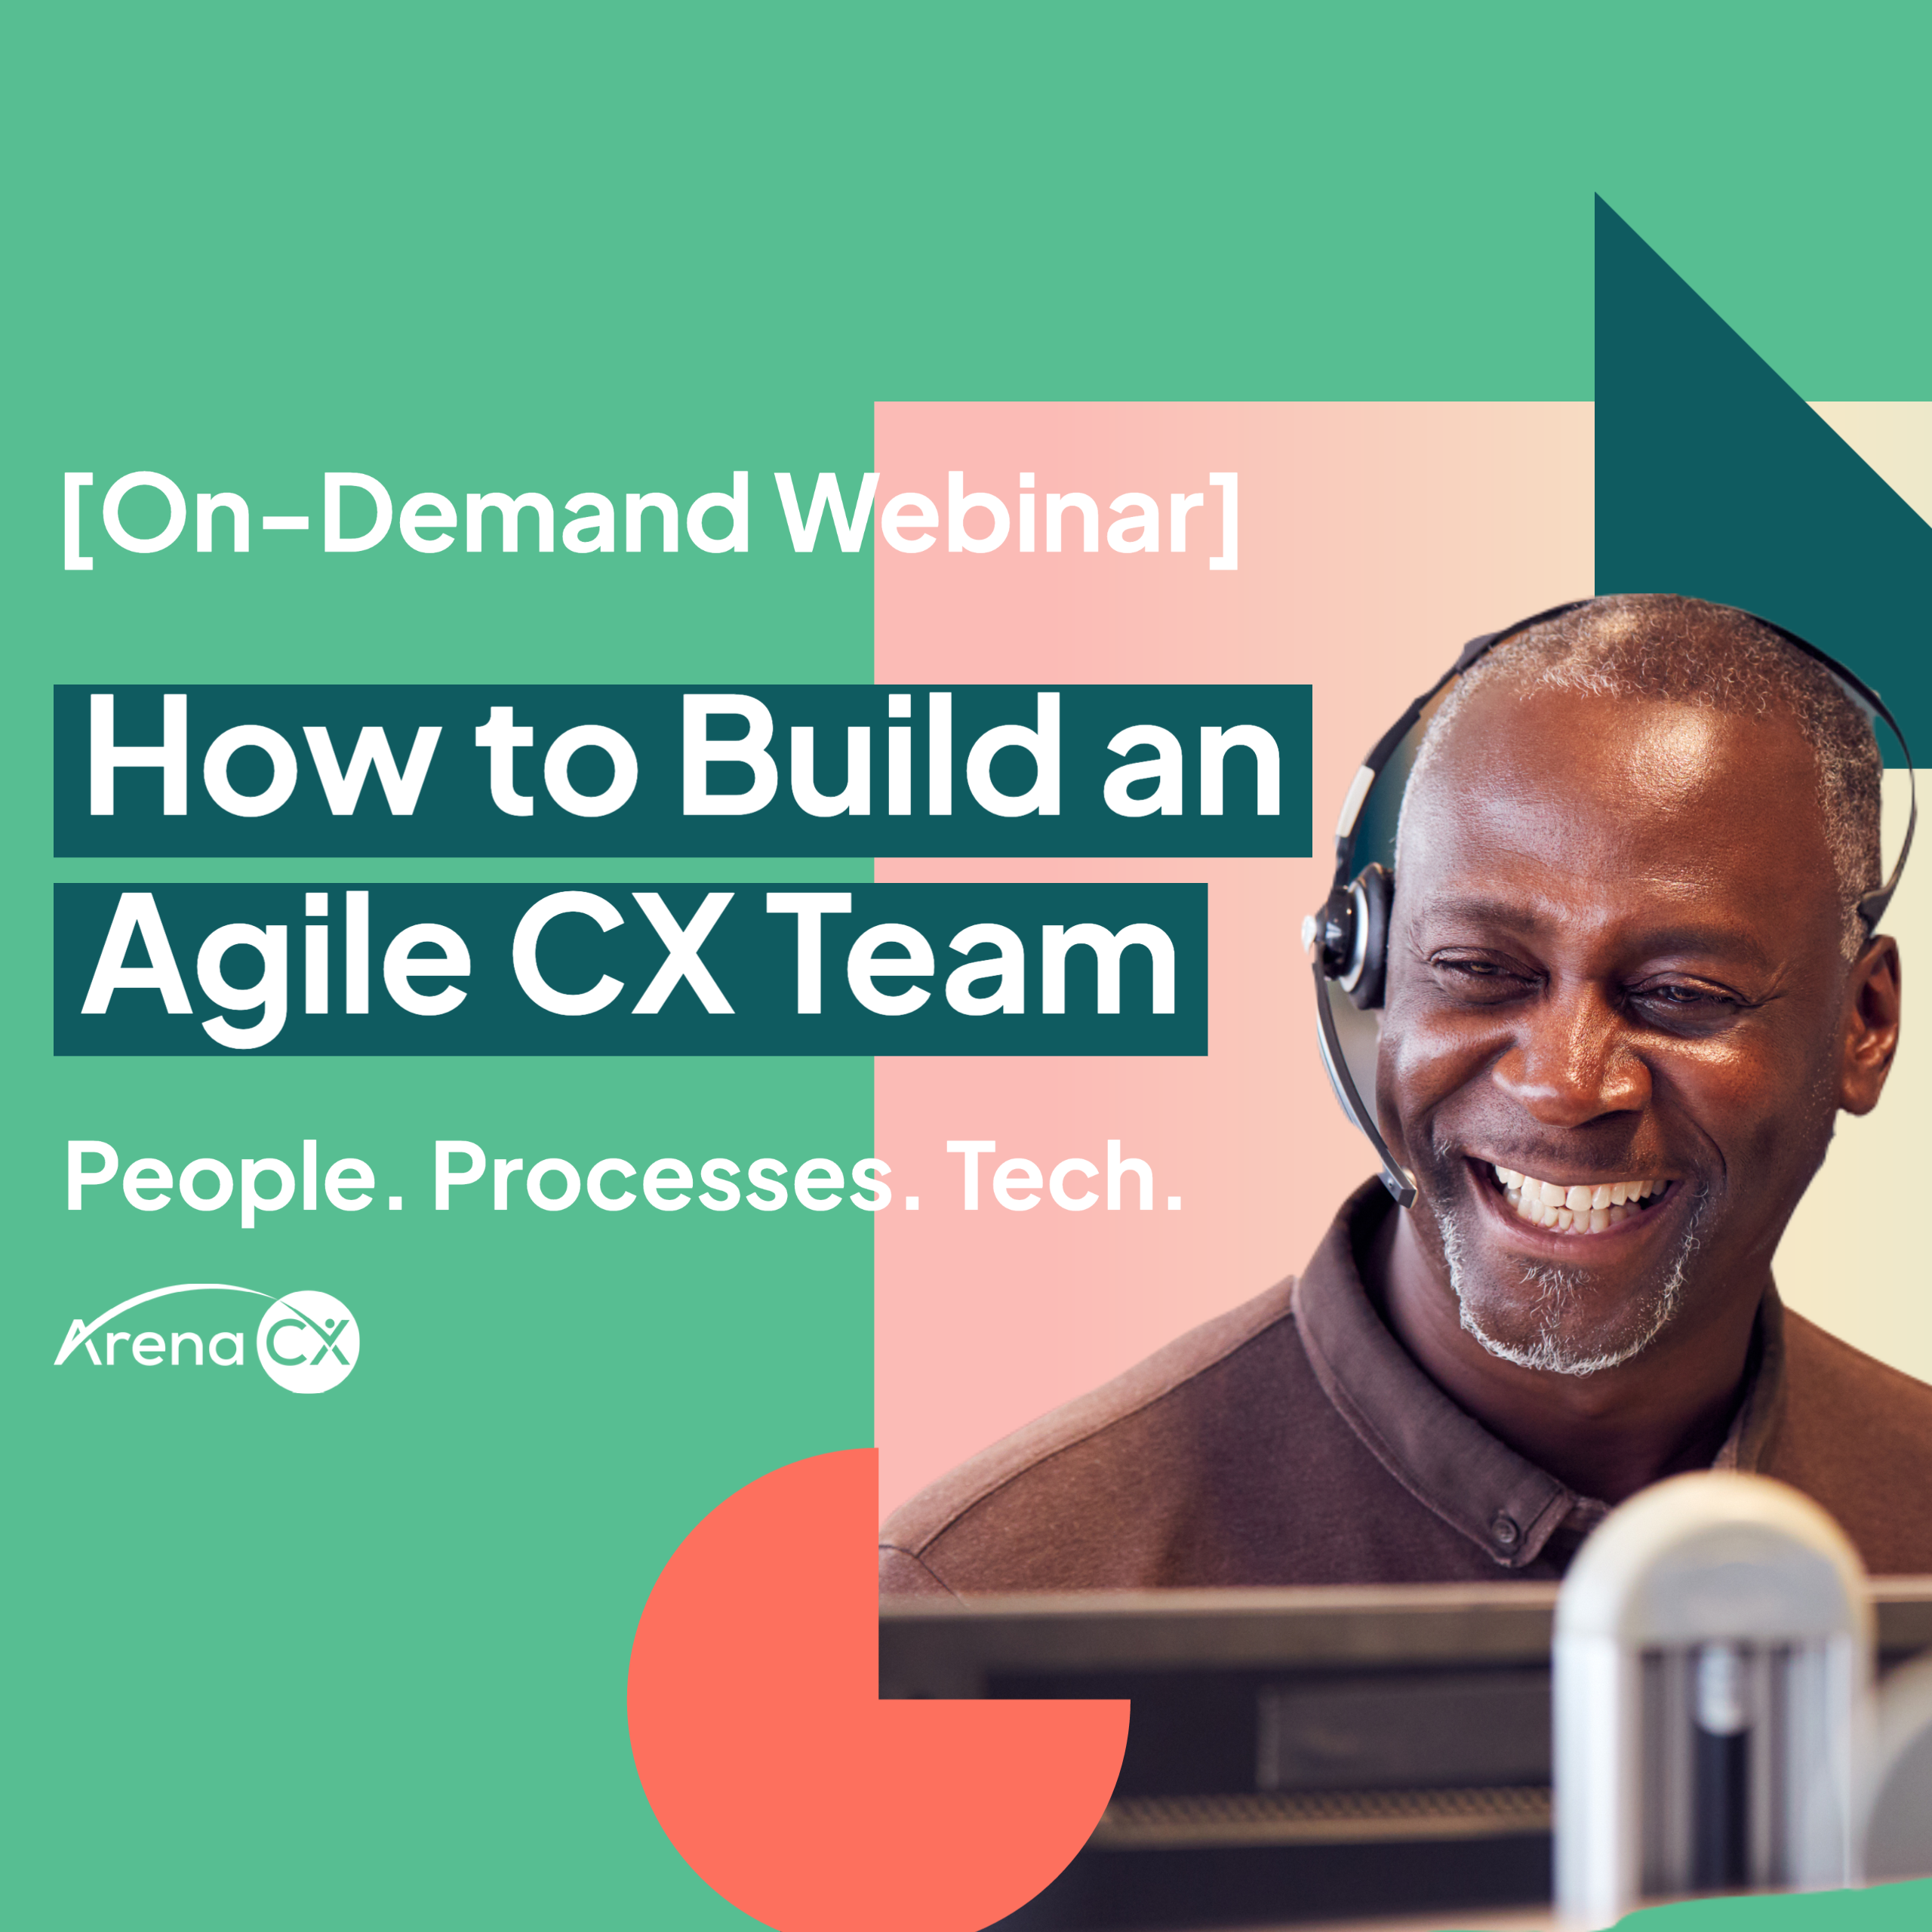 How to Build an Agile CX Team focusing on people, processes, and technology in your customer service organization.